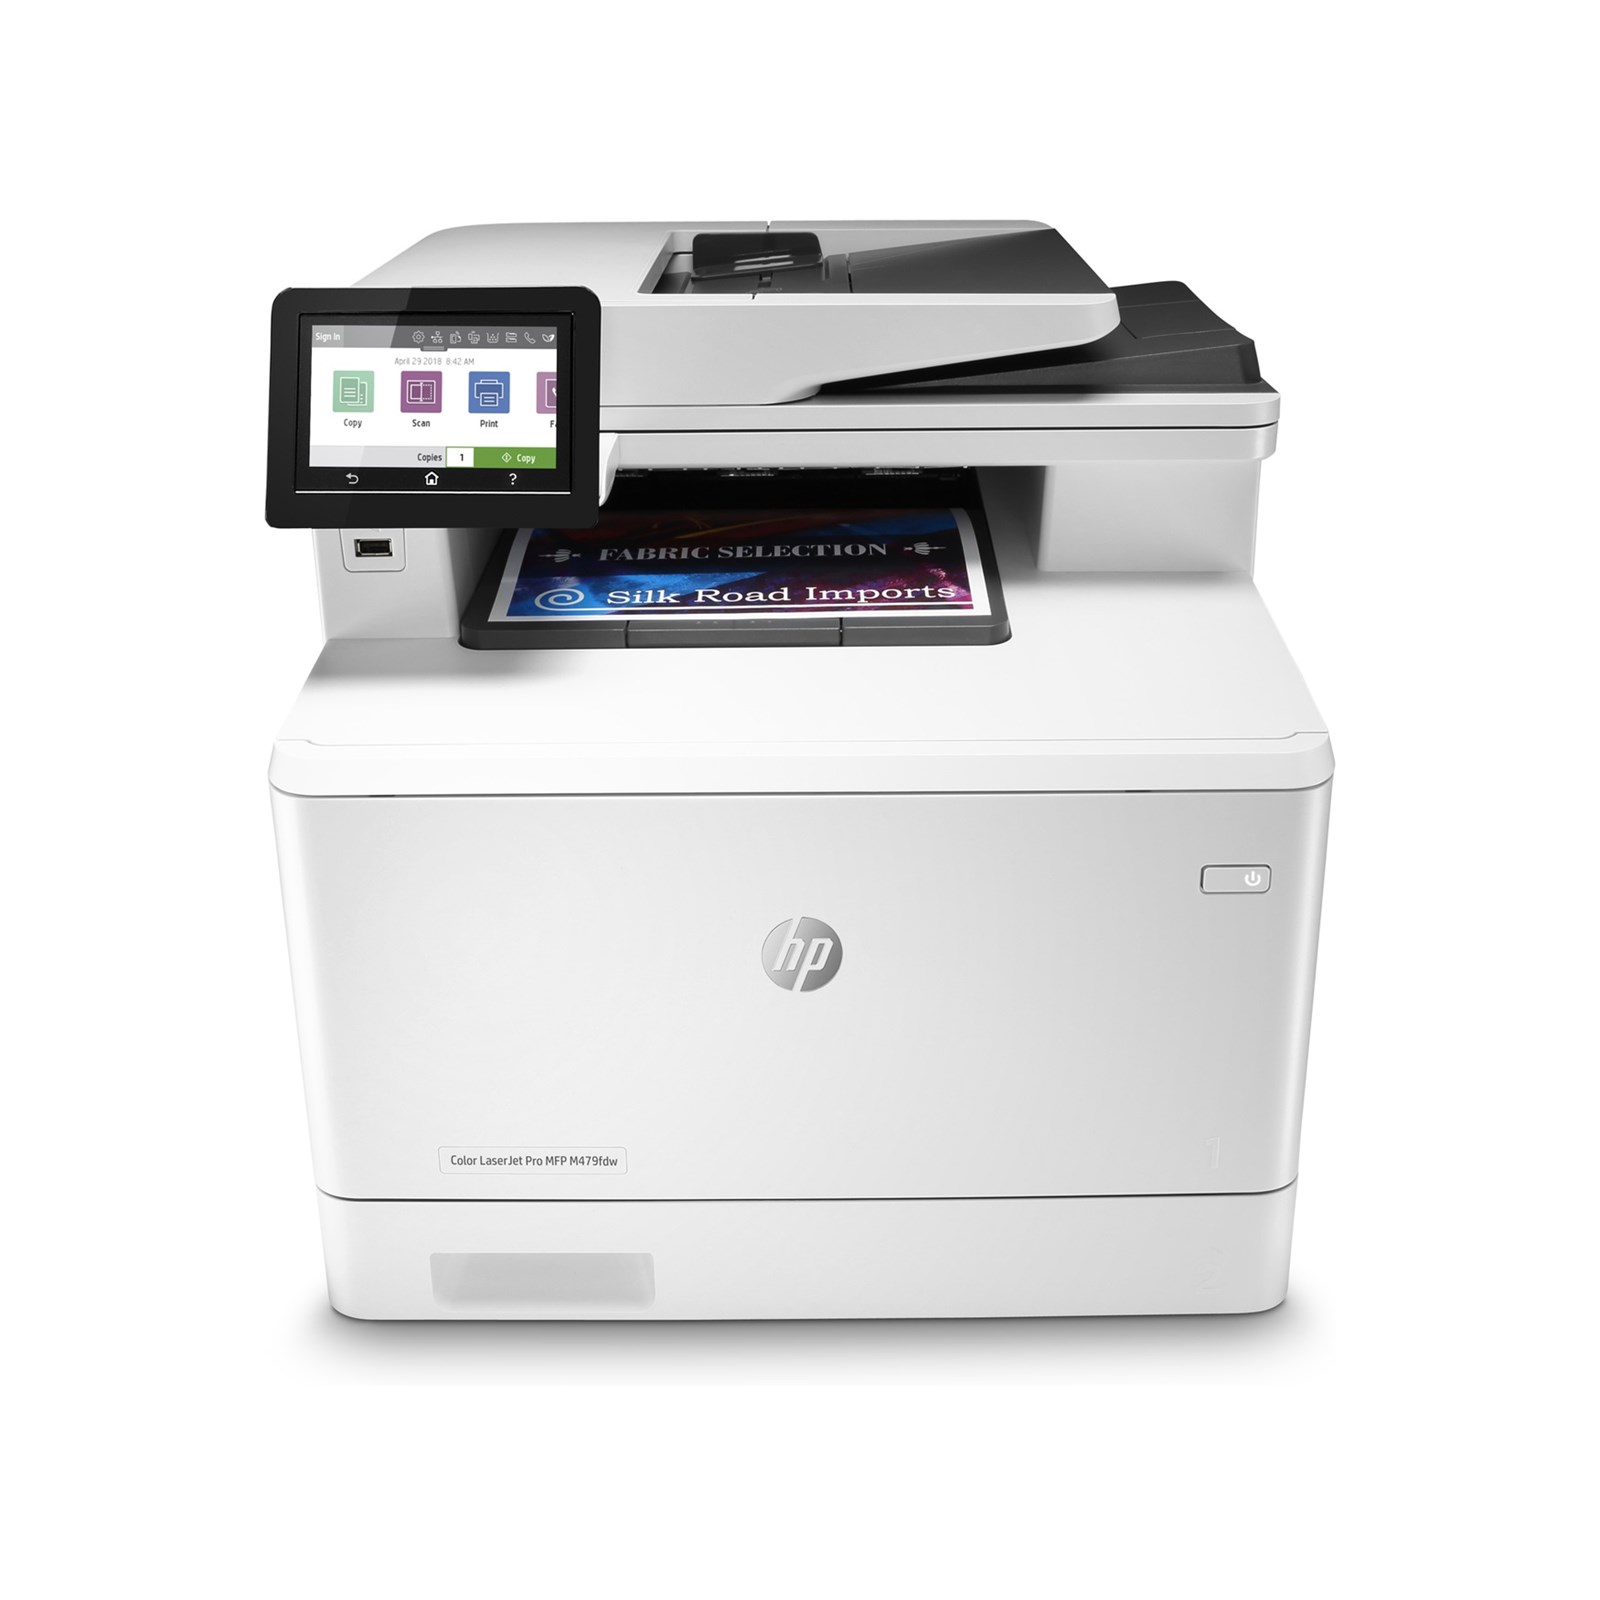 HP Colour LaserJet Pro MFP M479fdw A4 Multifunction Printer with Fax